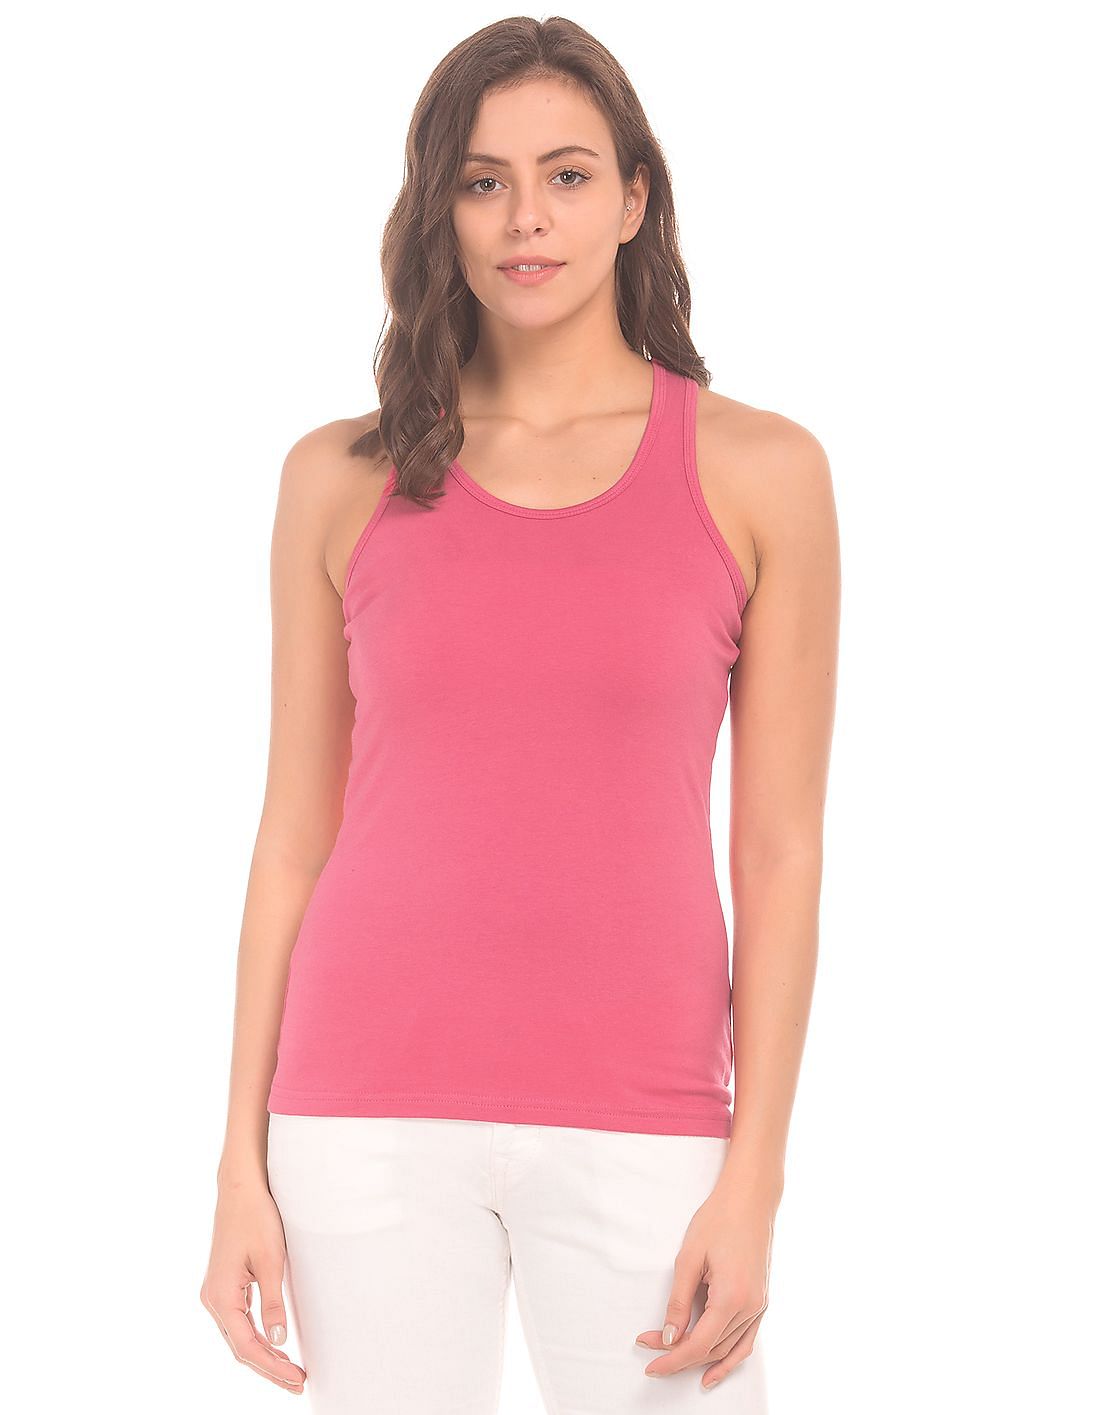 Buy Unlimited Women Solid Cotton Spandex Tank Top - NNNOW.com